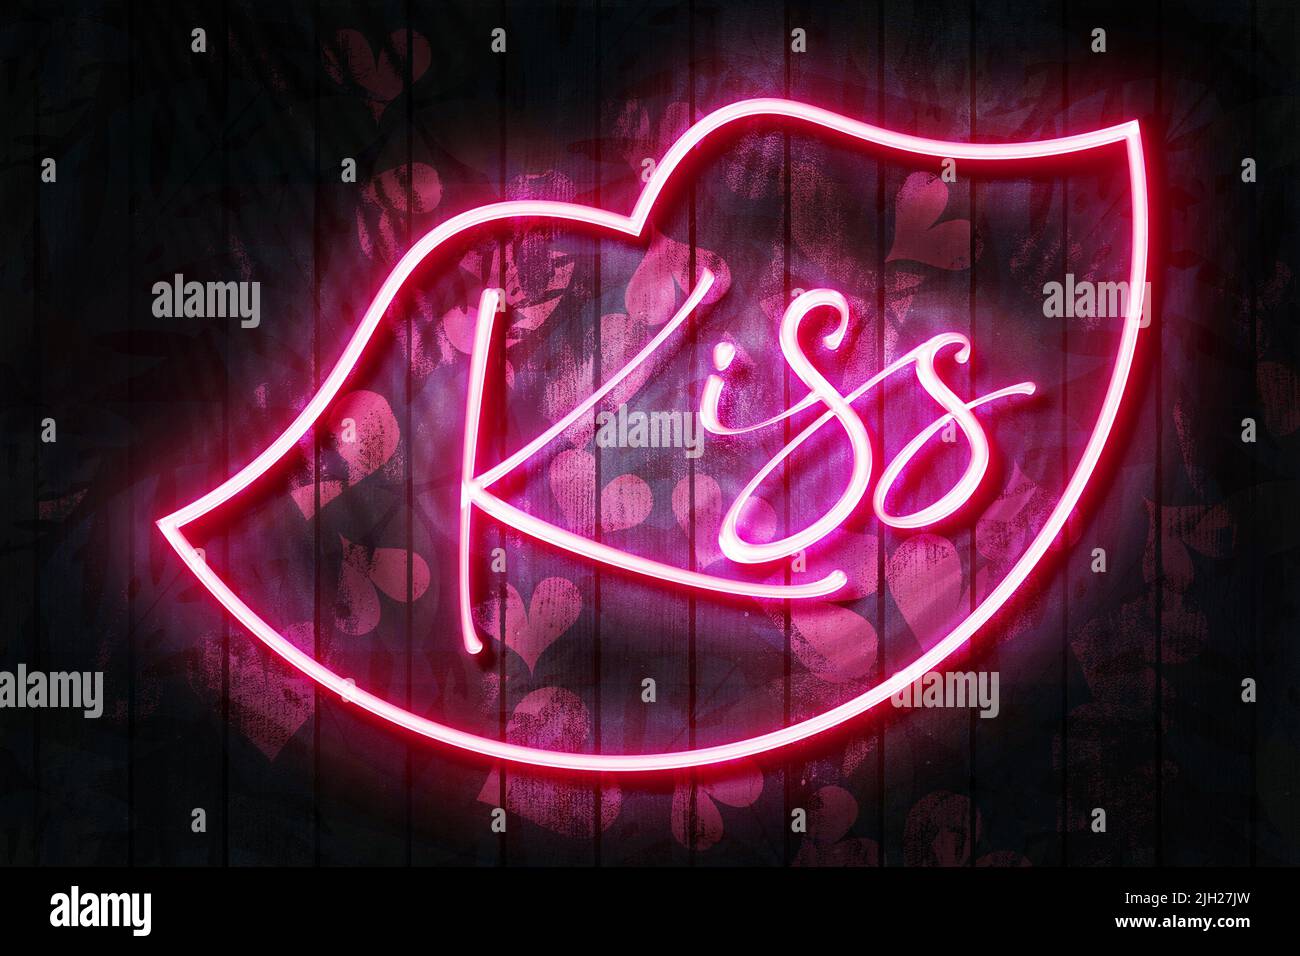 Kiss neon sign with neon lips on a dark wooden wall, 3D illustration with red heart background. Stock Photo